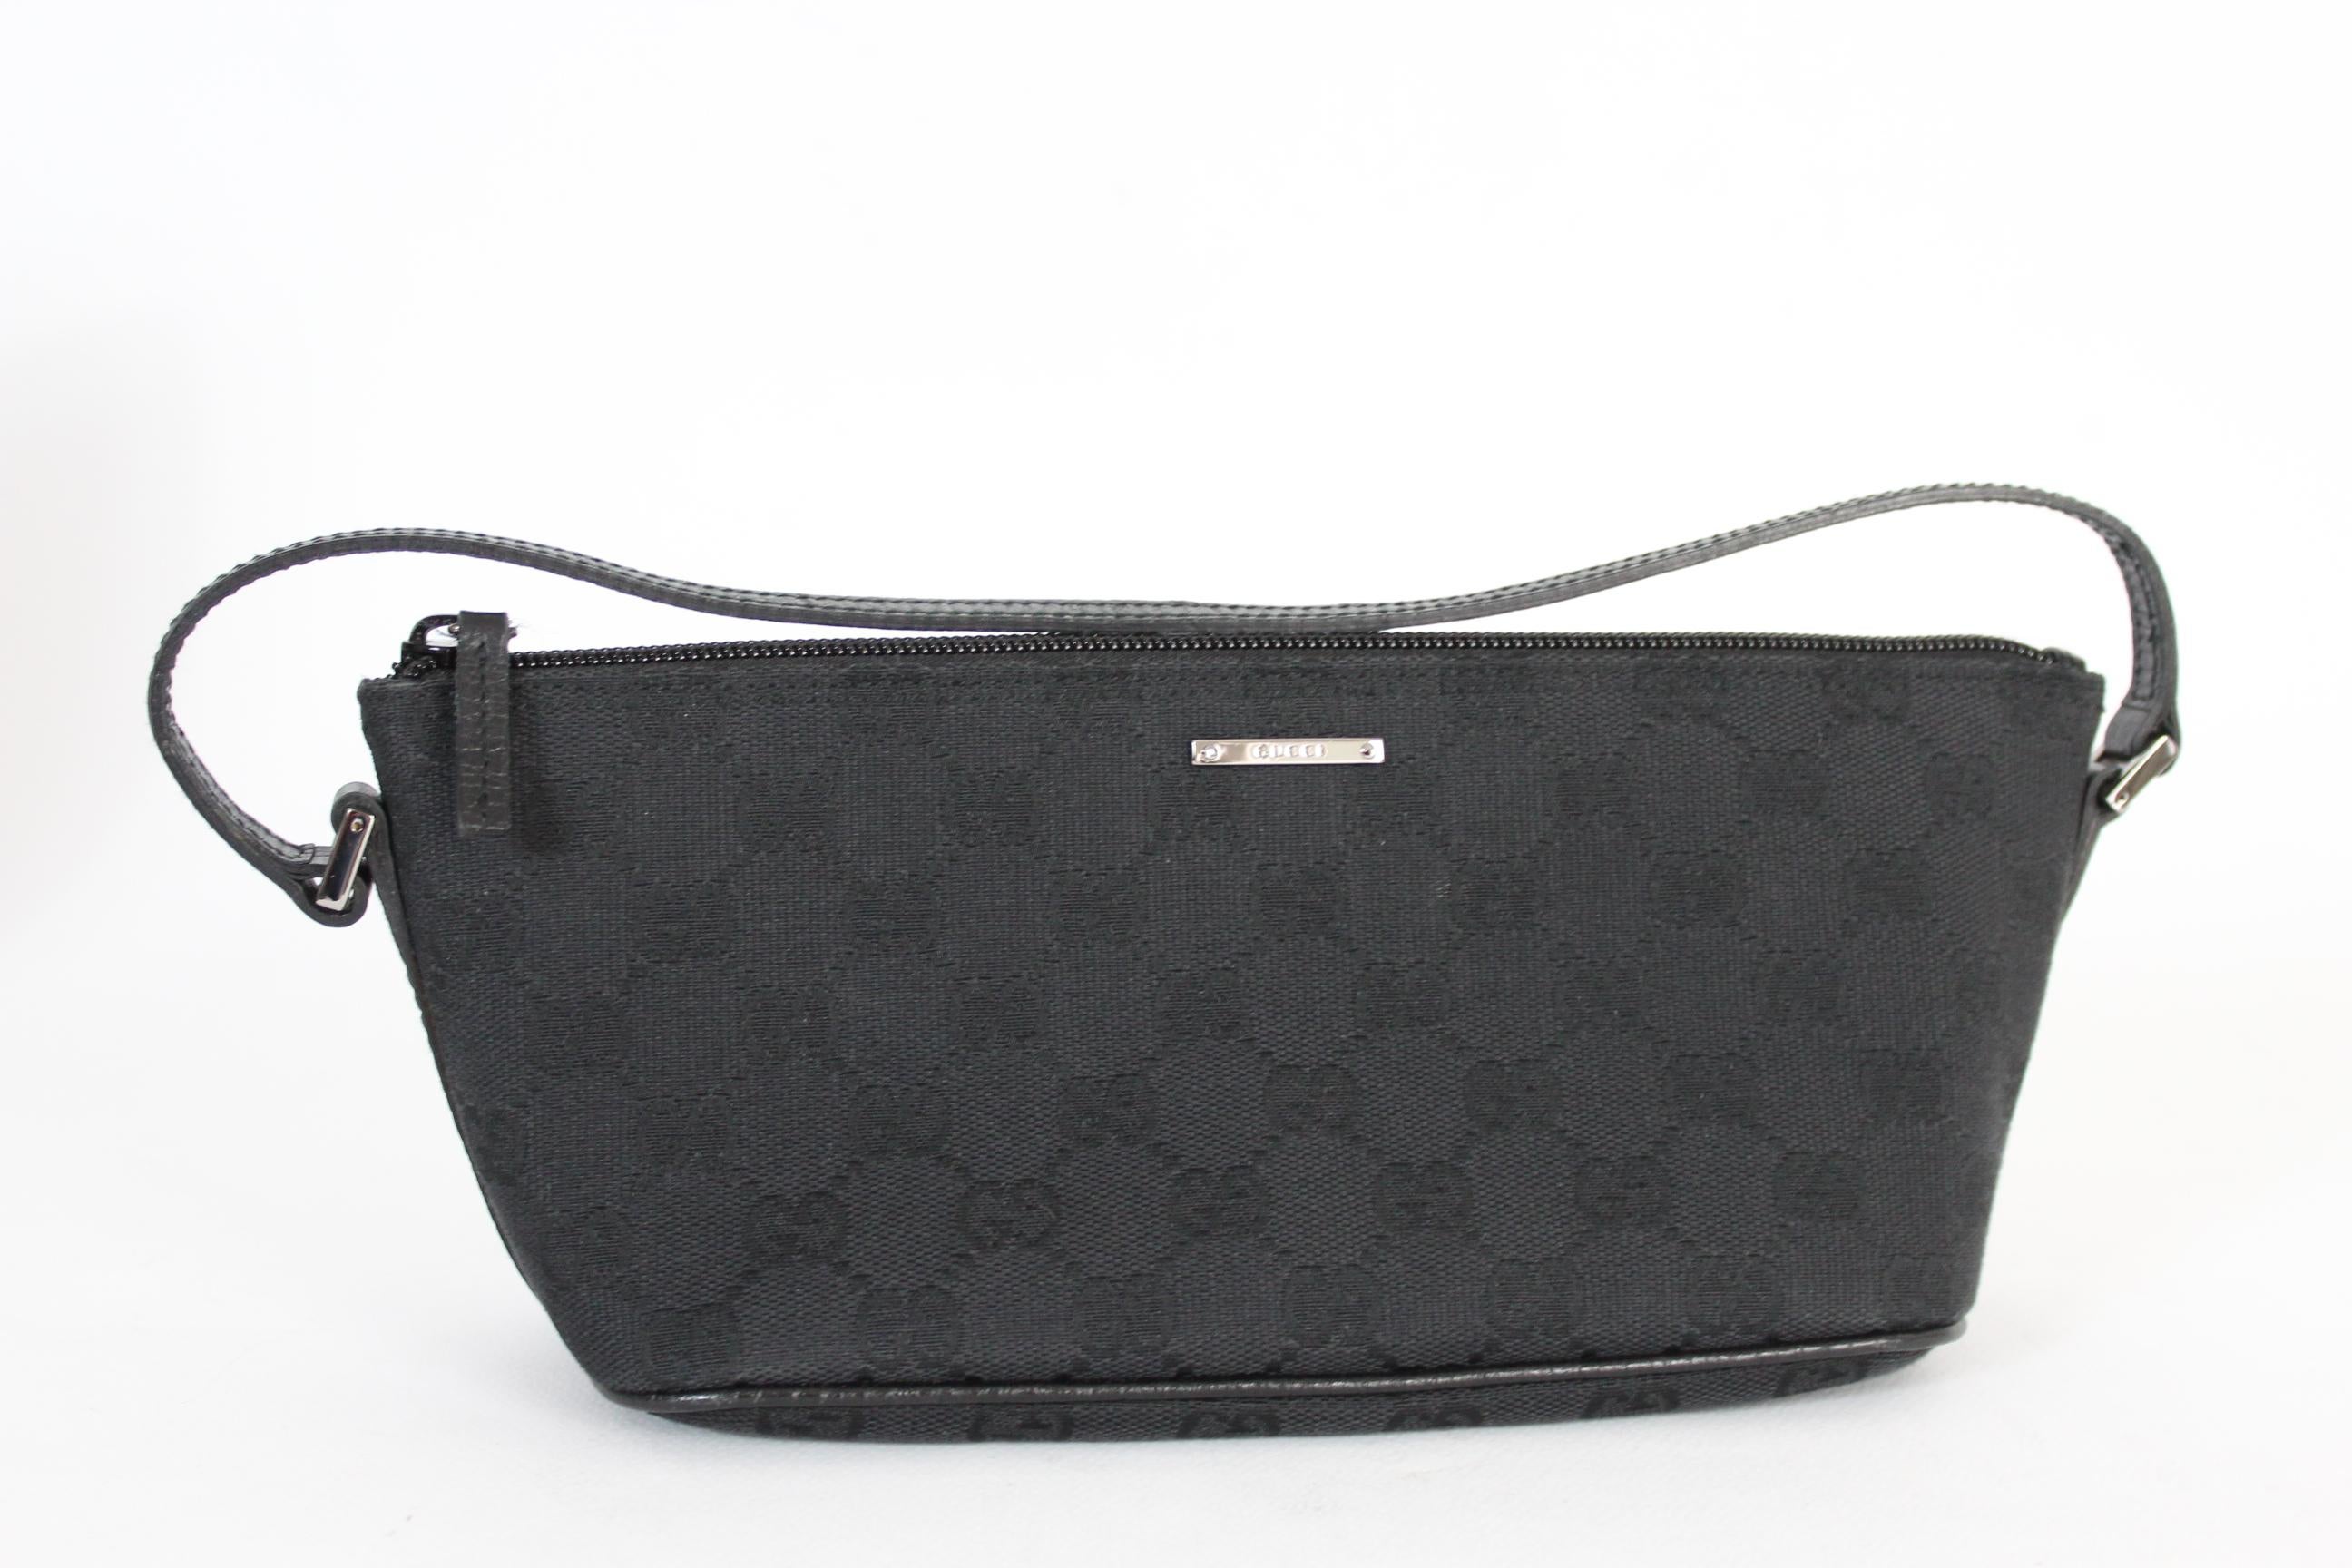 Gucci Boat vintage 2000s handbag. Evening clutch bag color black with monogram motif in canvas , handle in leather. Zip closure. Made in Italy. Excellent vintage condition. Present the original Gucci envelope.

Internal code: 07198 2123
Height: 11